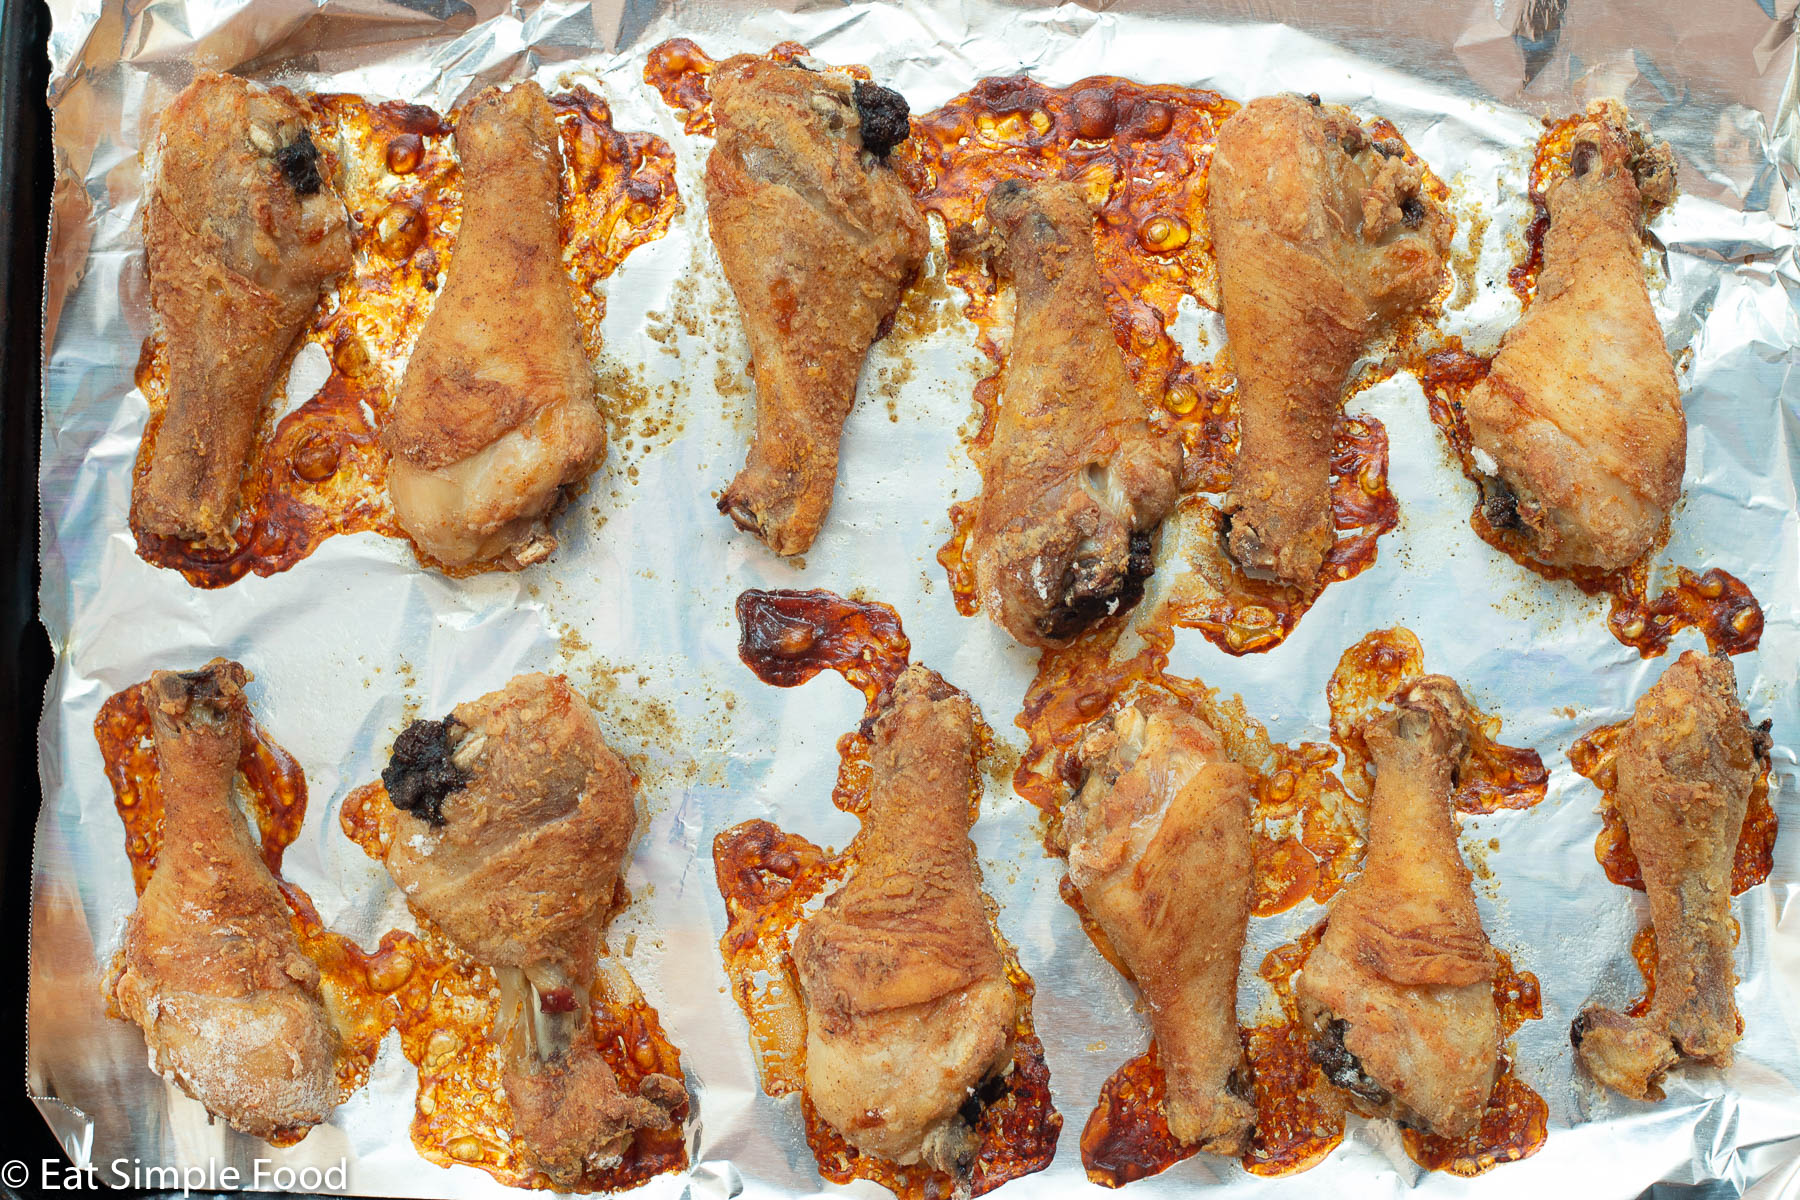 12 Baked Chicken drumsticks on an aluminum covered baking sheet. Top view.